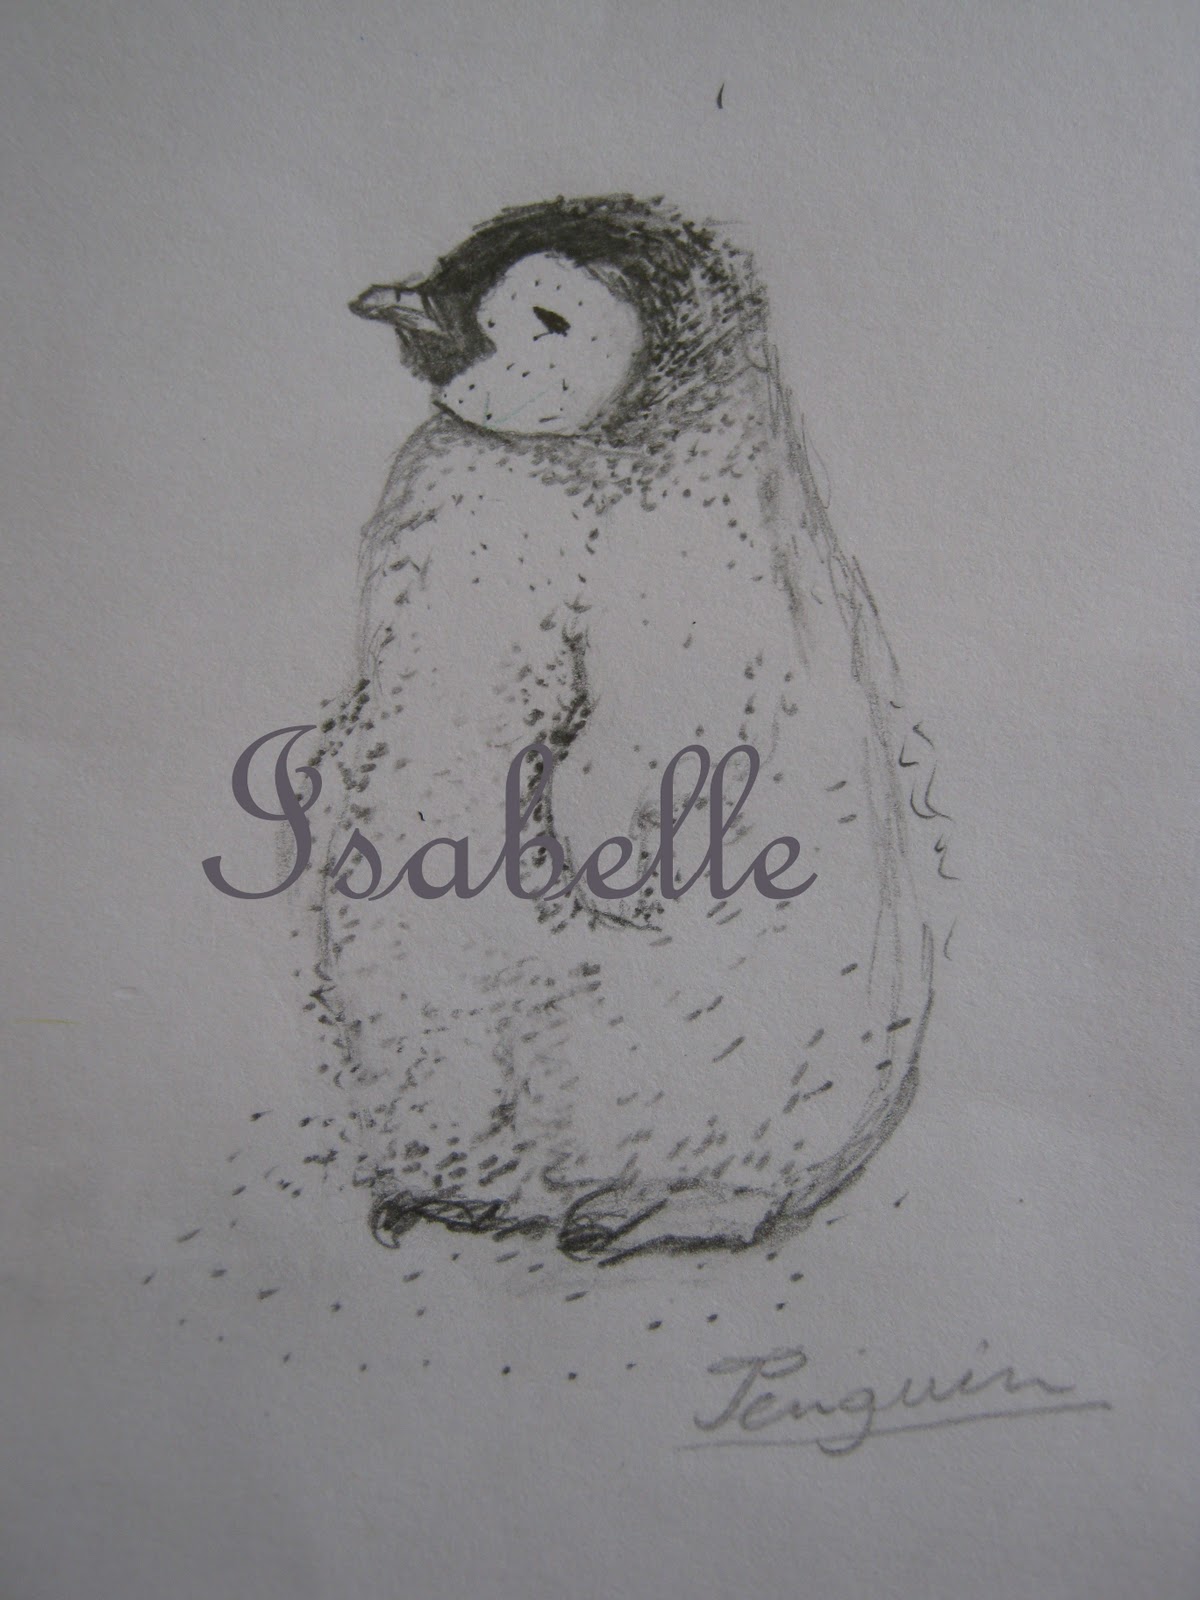 Isabelle Arts - 13 Year Old Child Prodigy: Animal Drawings